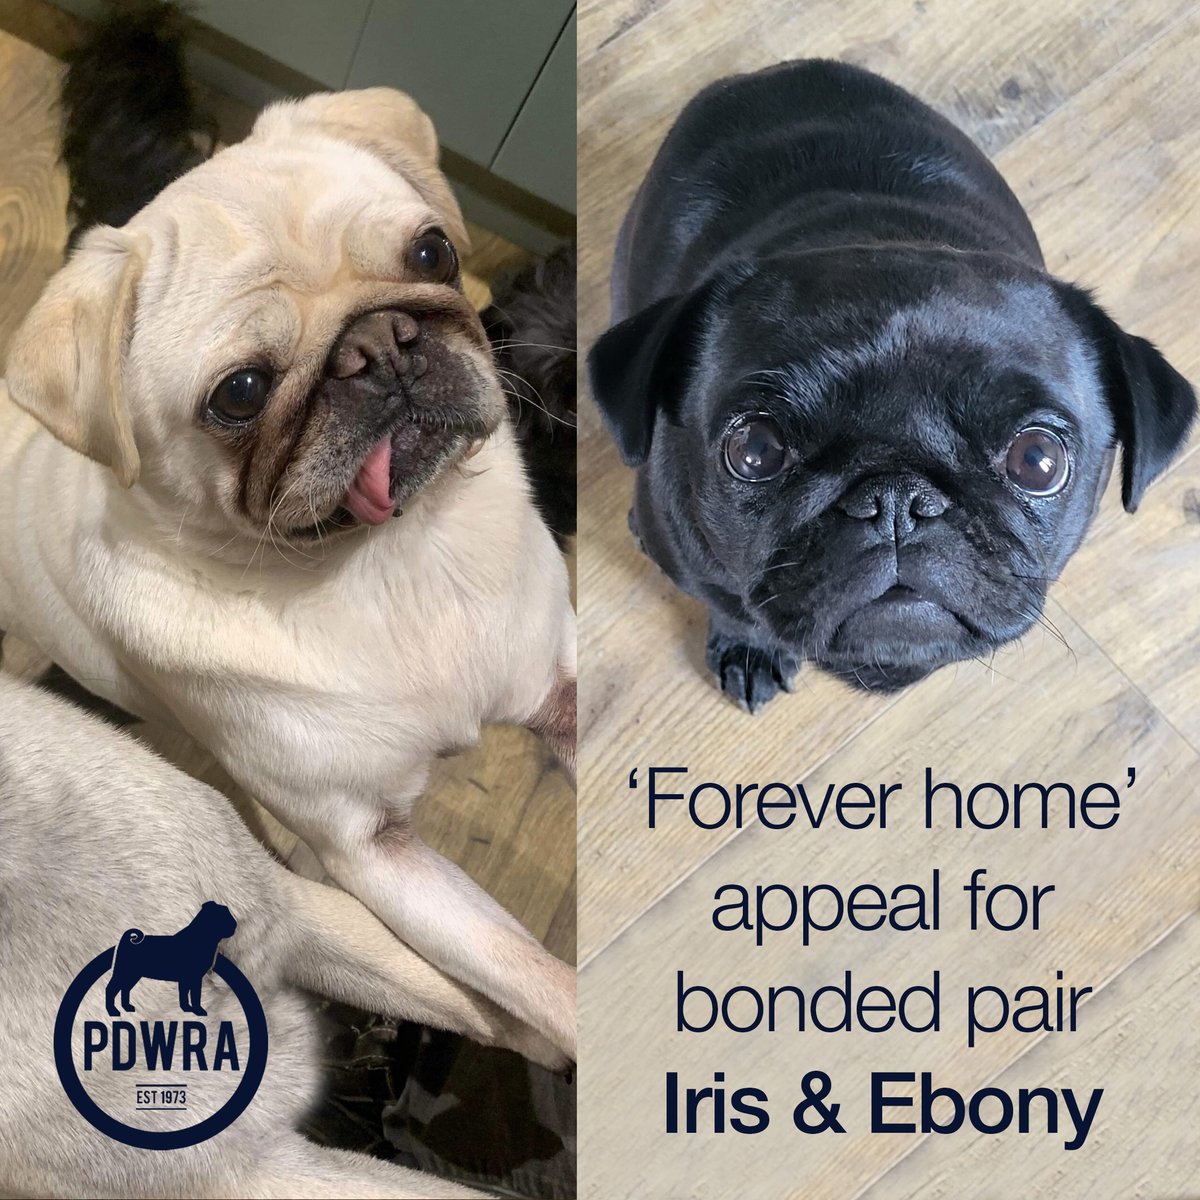 Adorable Iris and Ebony, a bonded pair, are looking for their forever home! 
If you think you might be able to help just click the link to find out more about them - ecs.page.link/jX6v3 
#pdwra #pugcharity #pugwelfare #friendsofwelfare #foreverhome #pugadoption #pug